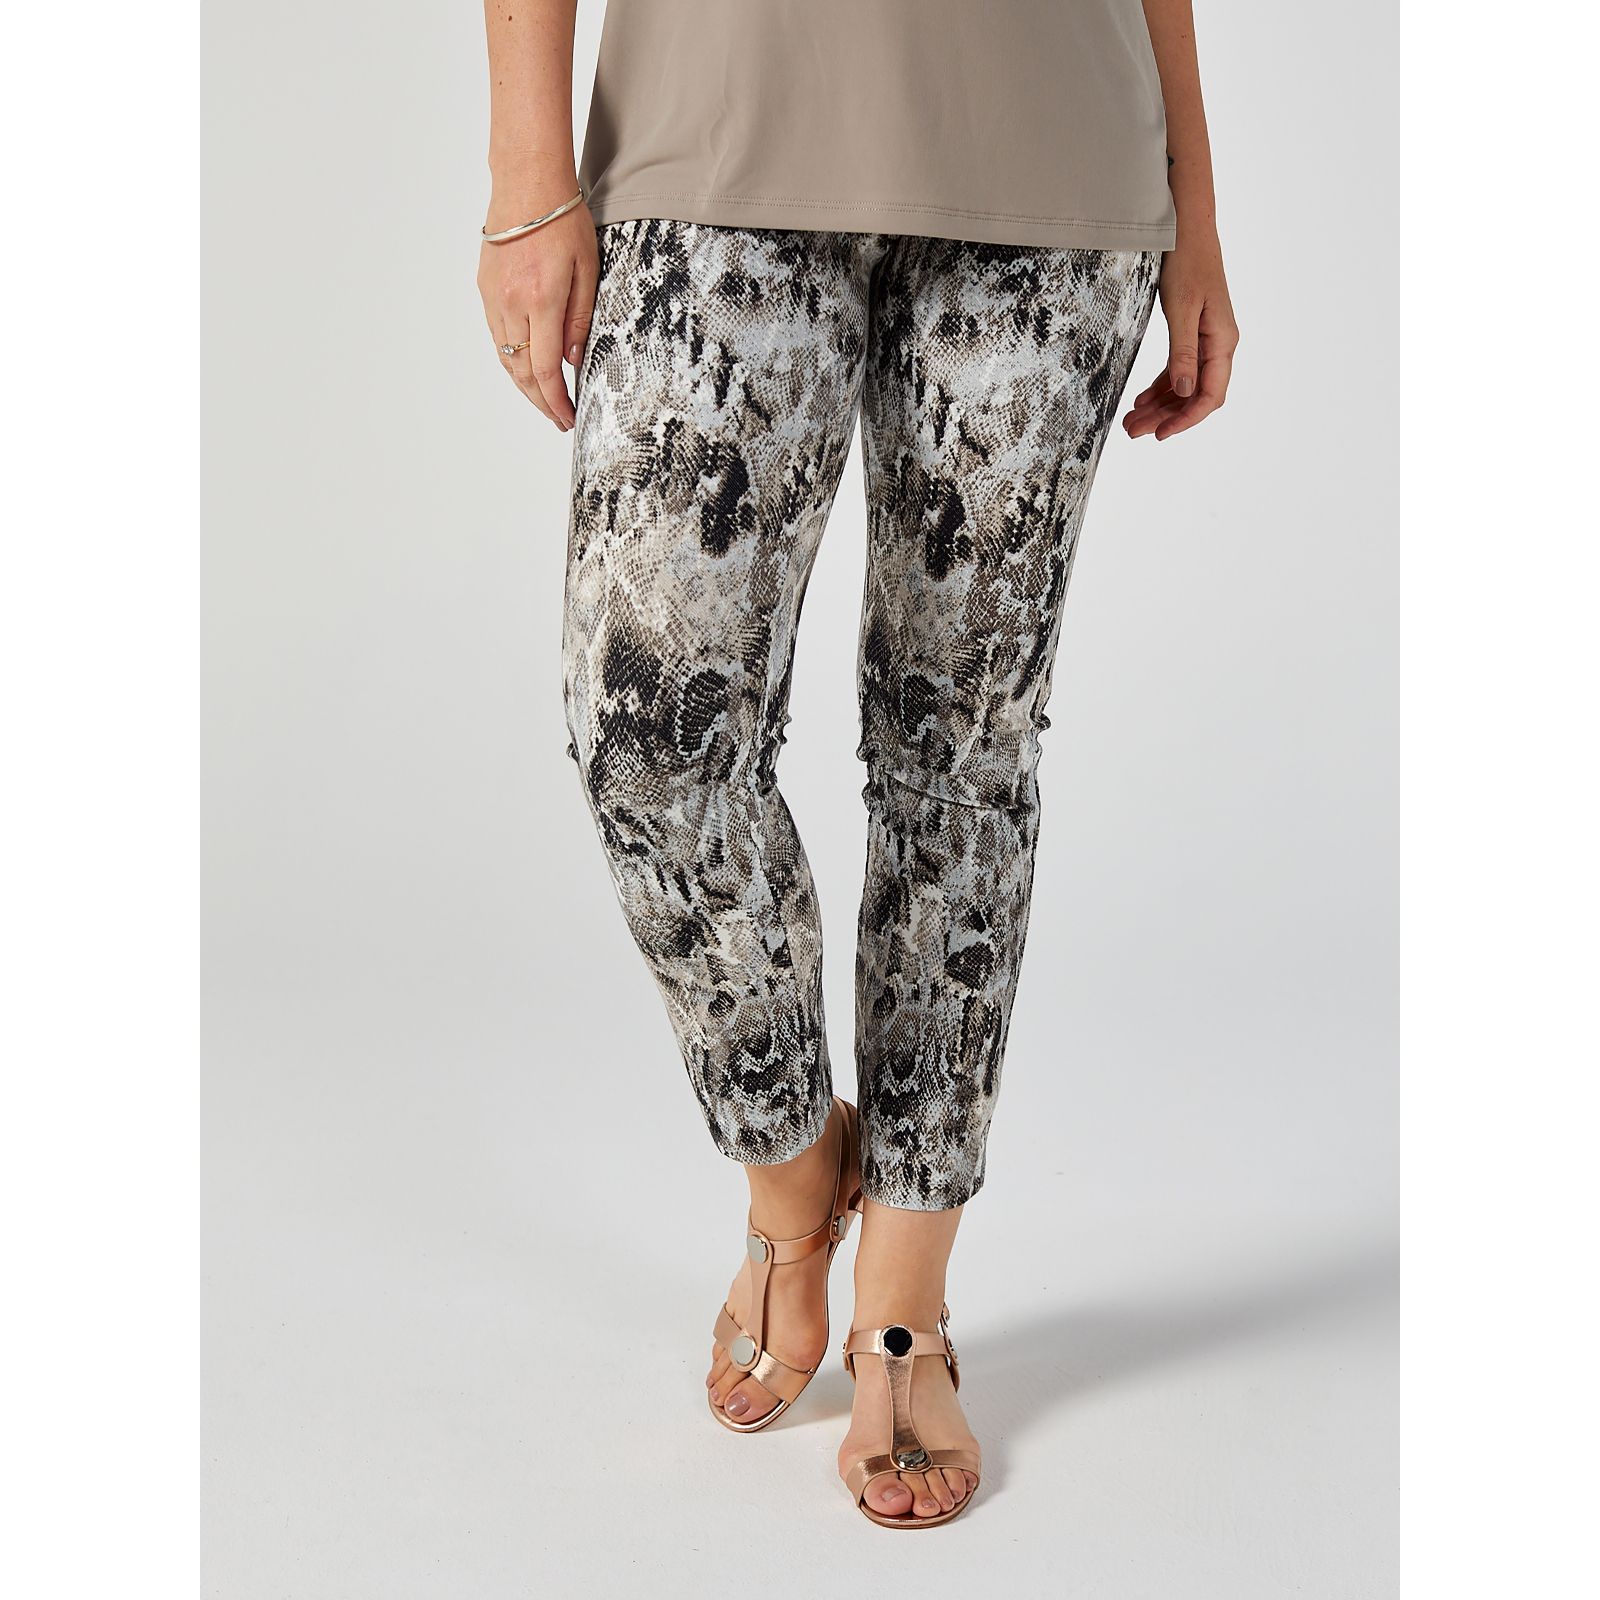 Kim & Co Deluxe Denim Knit Printed Trousers with Pockets - QVC UK